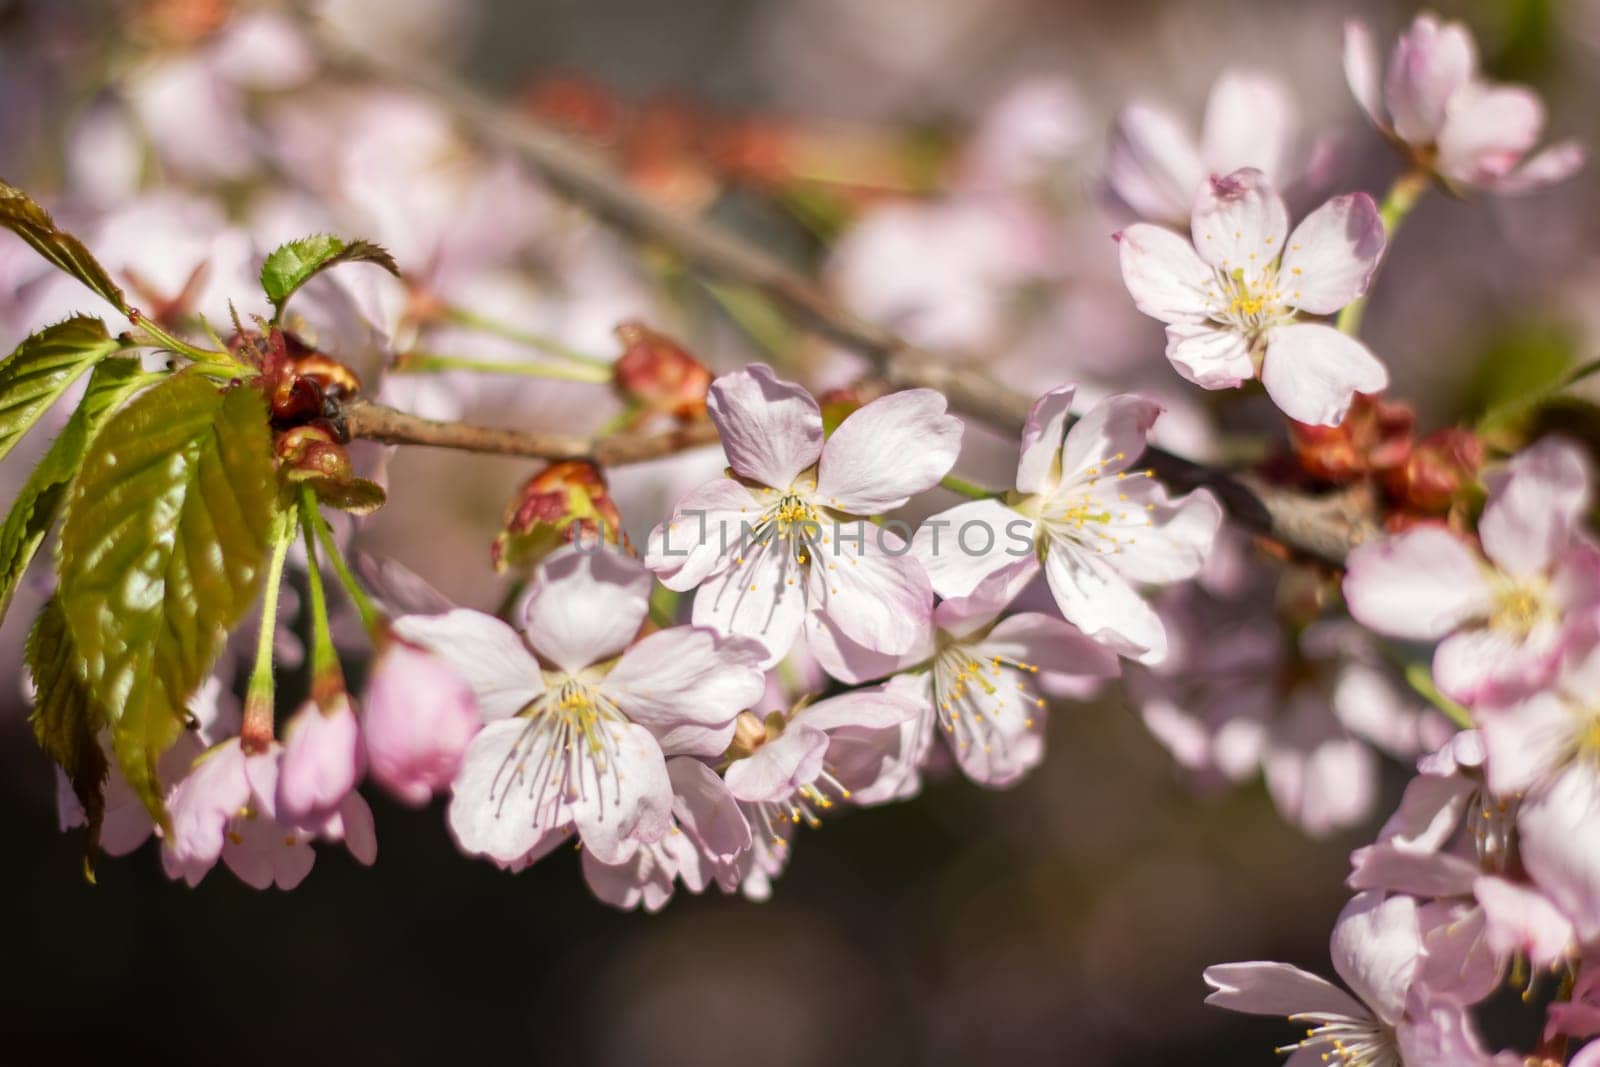 Closeup of cherry blossom petals on a twig in full bloom by Vera1703